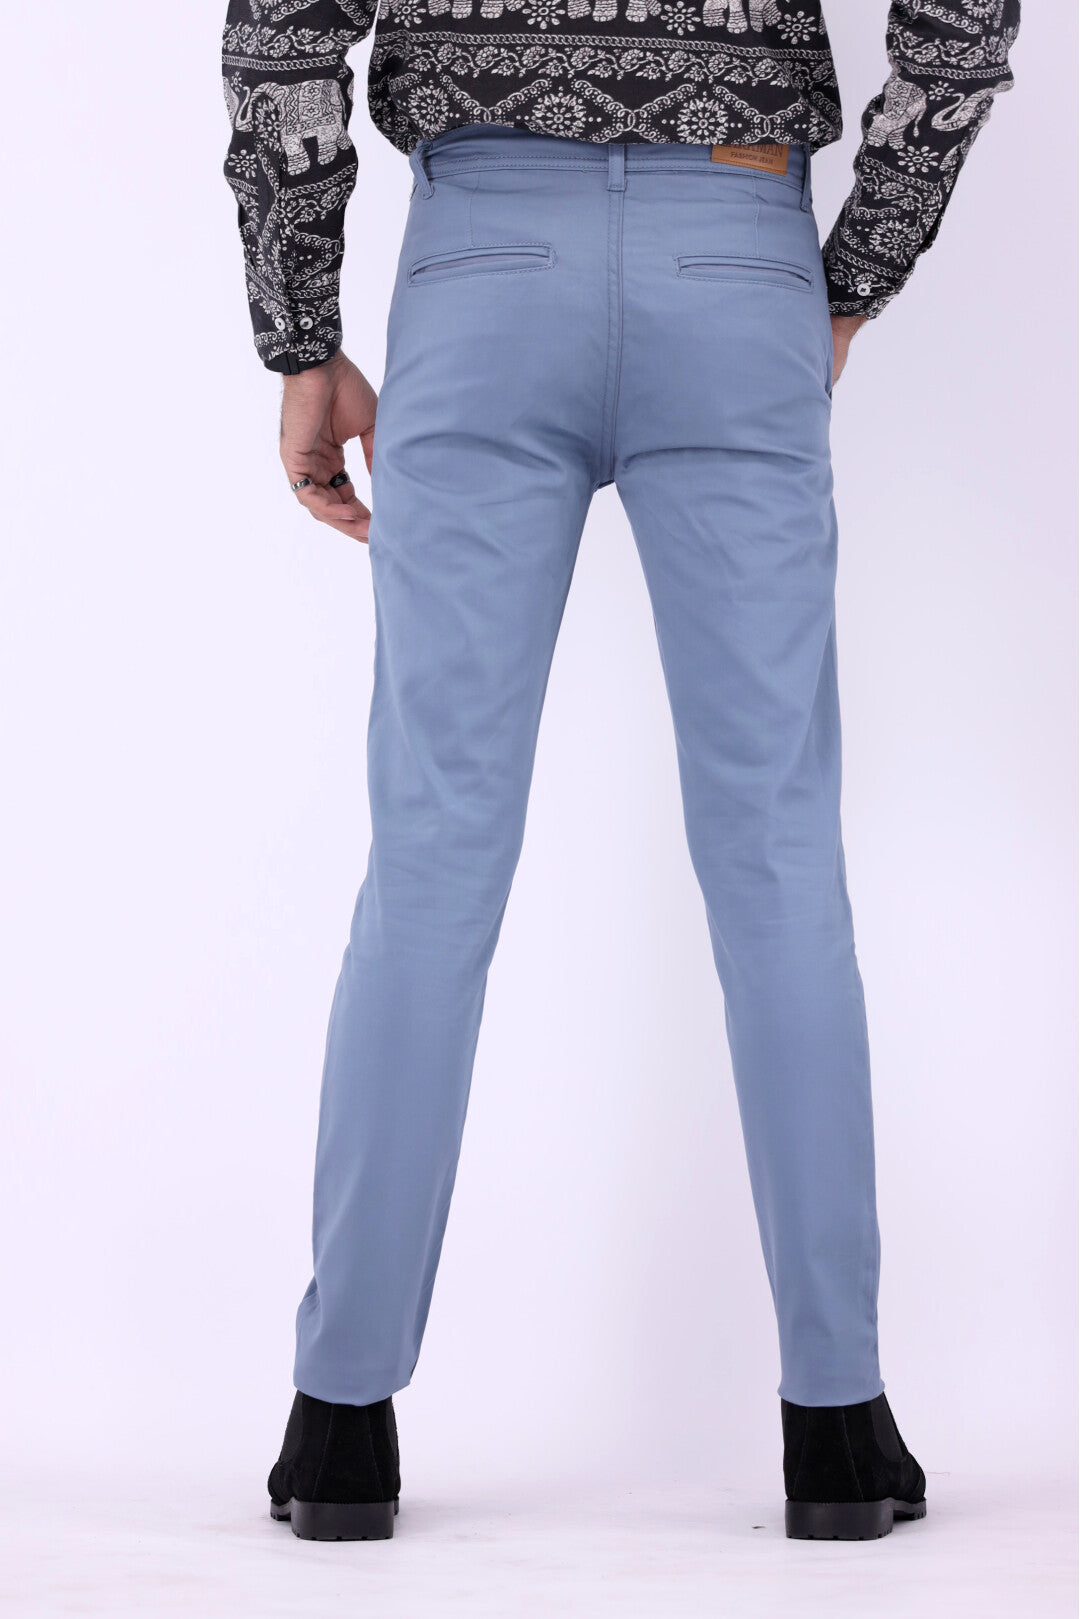 FT Cotton Chinos Pant - Light Blue